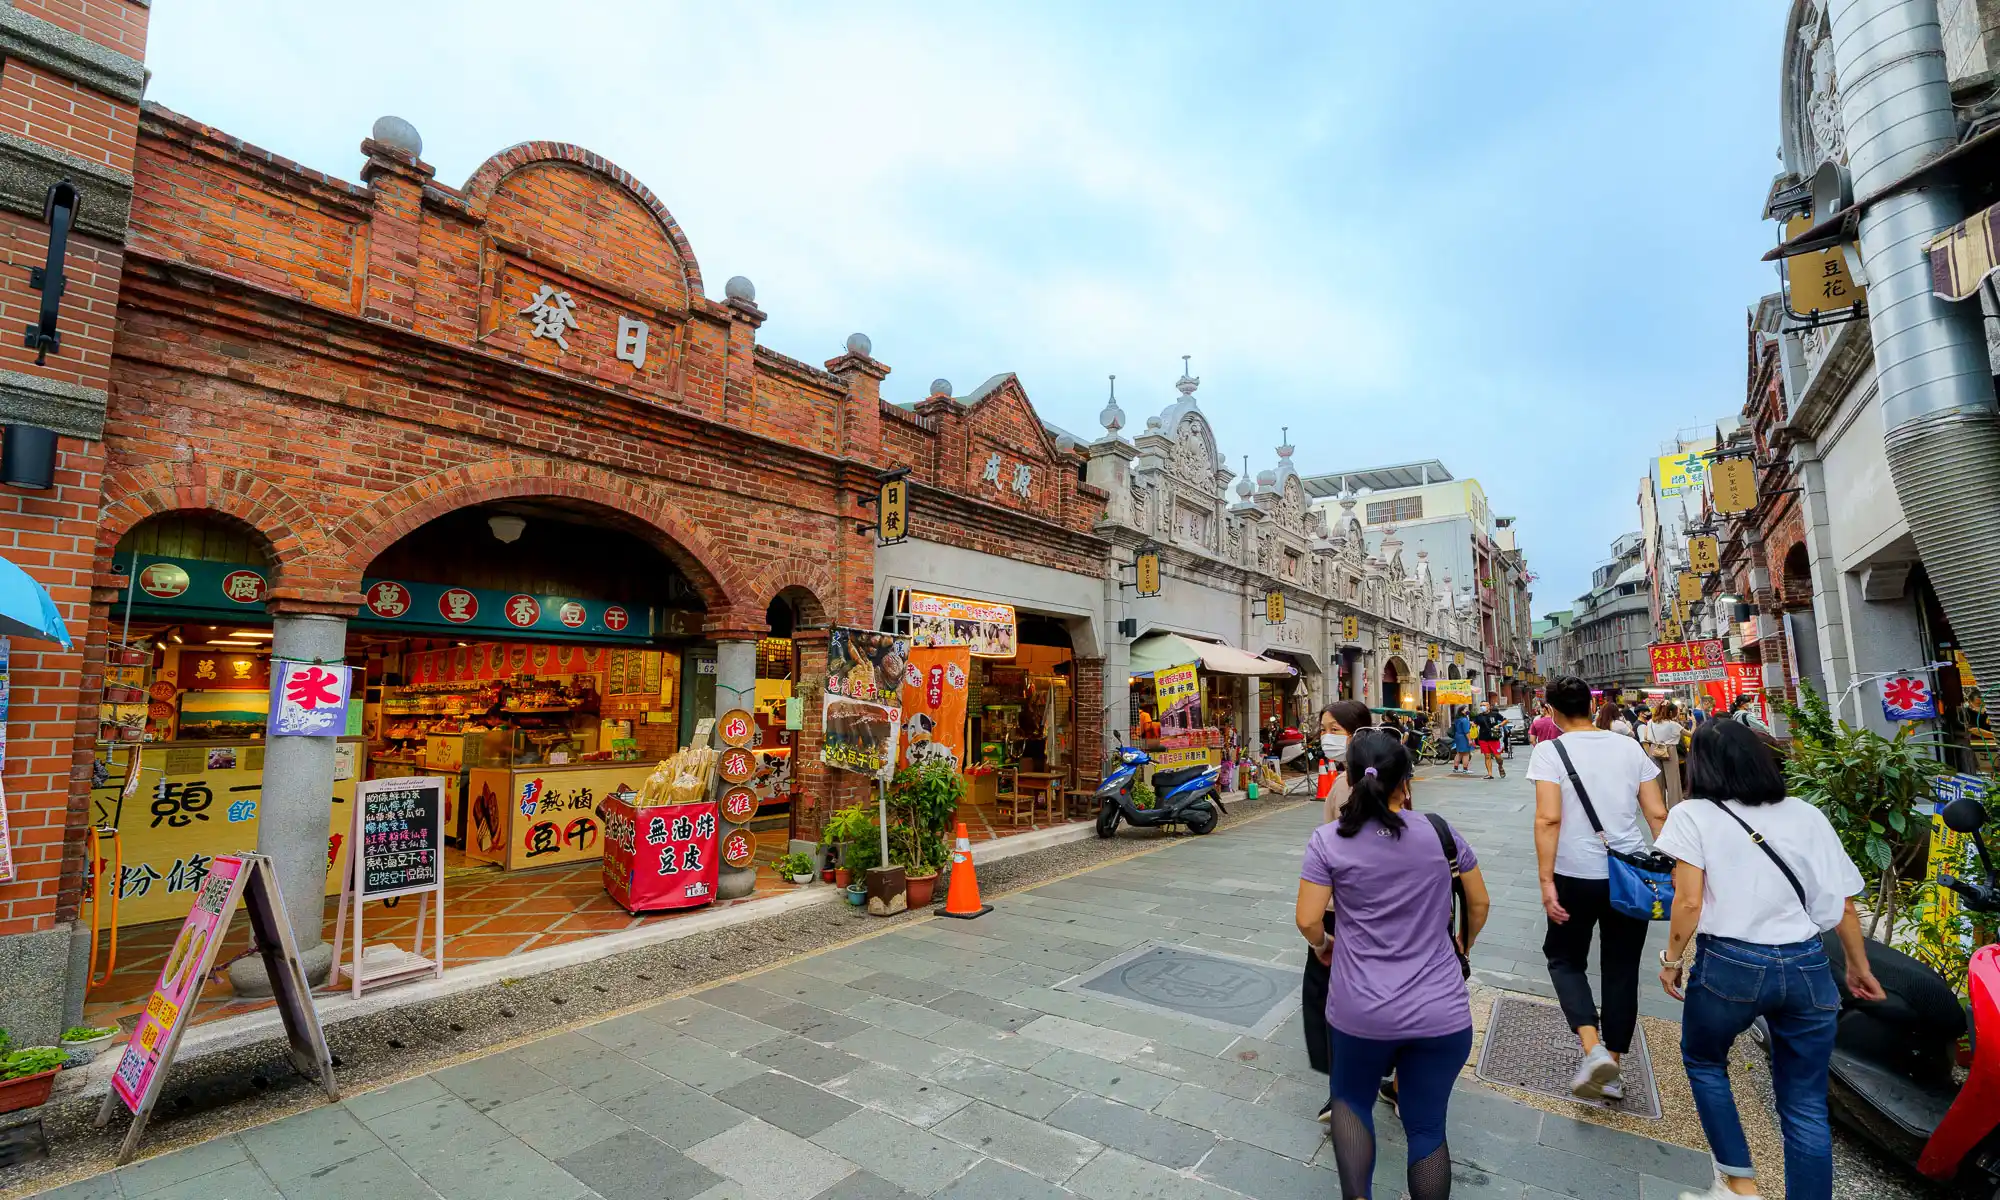 Heping Road, part of Daxi Old Street, features aged buildings made of red brick and white stone.